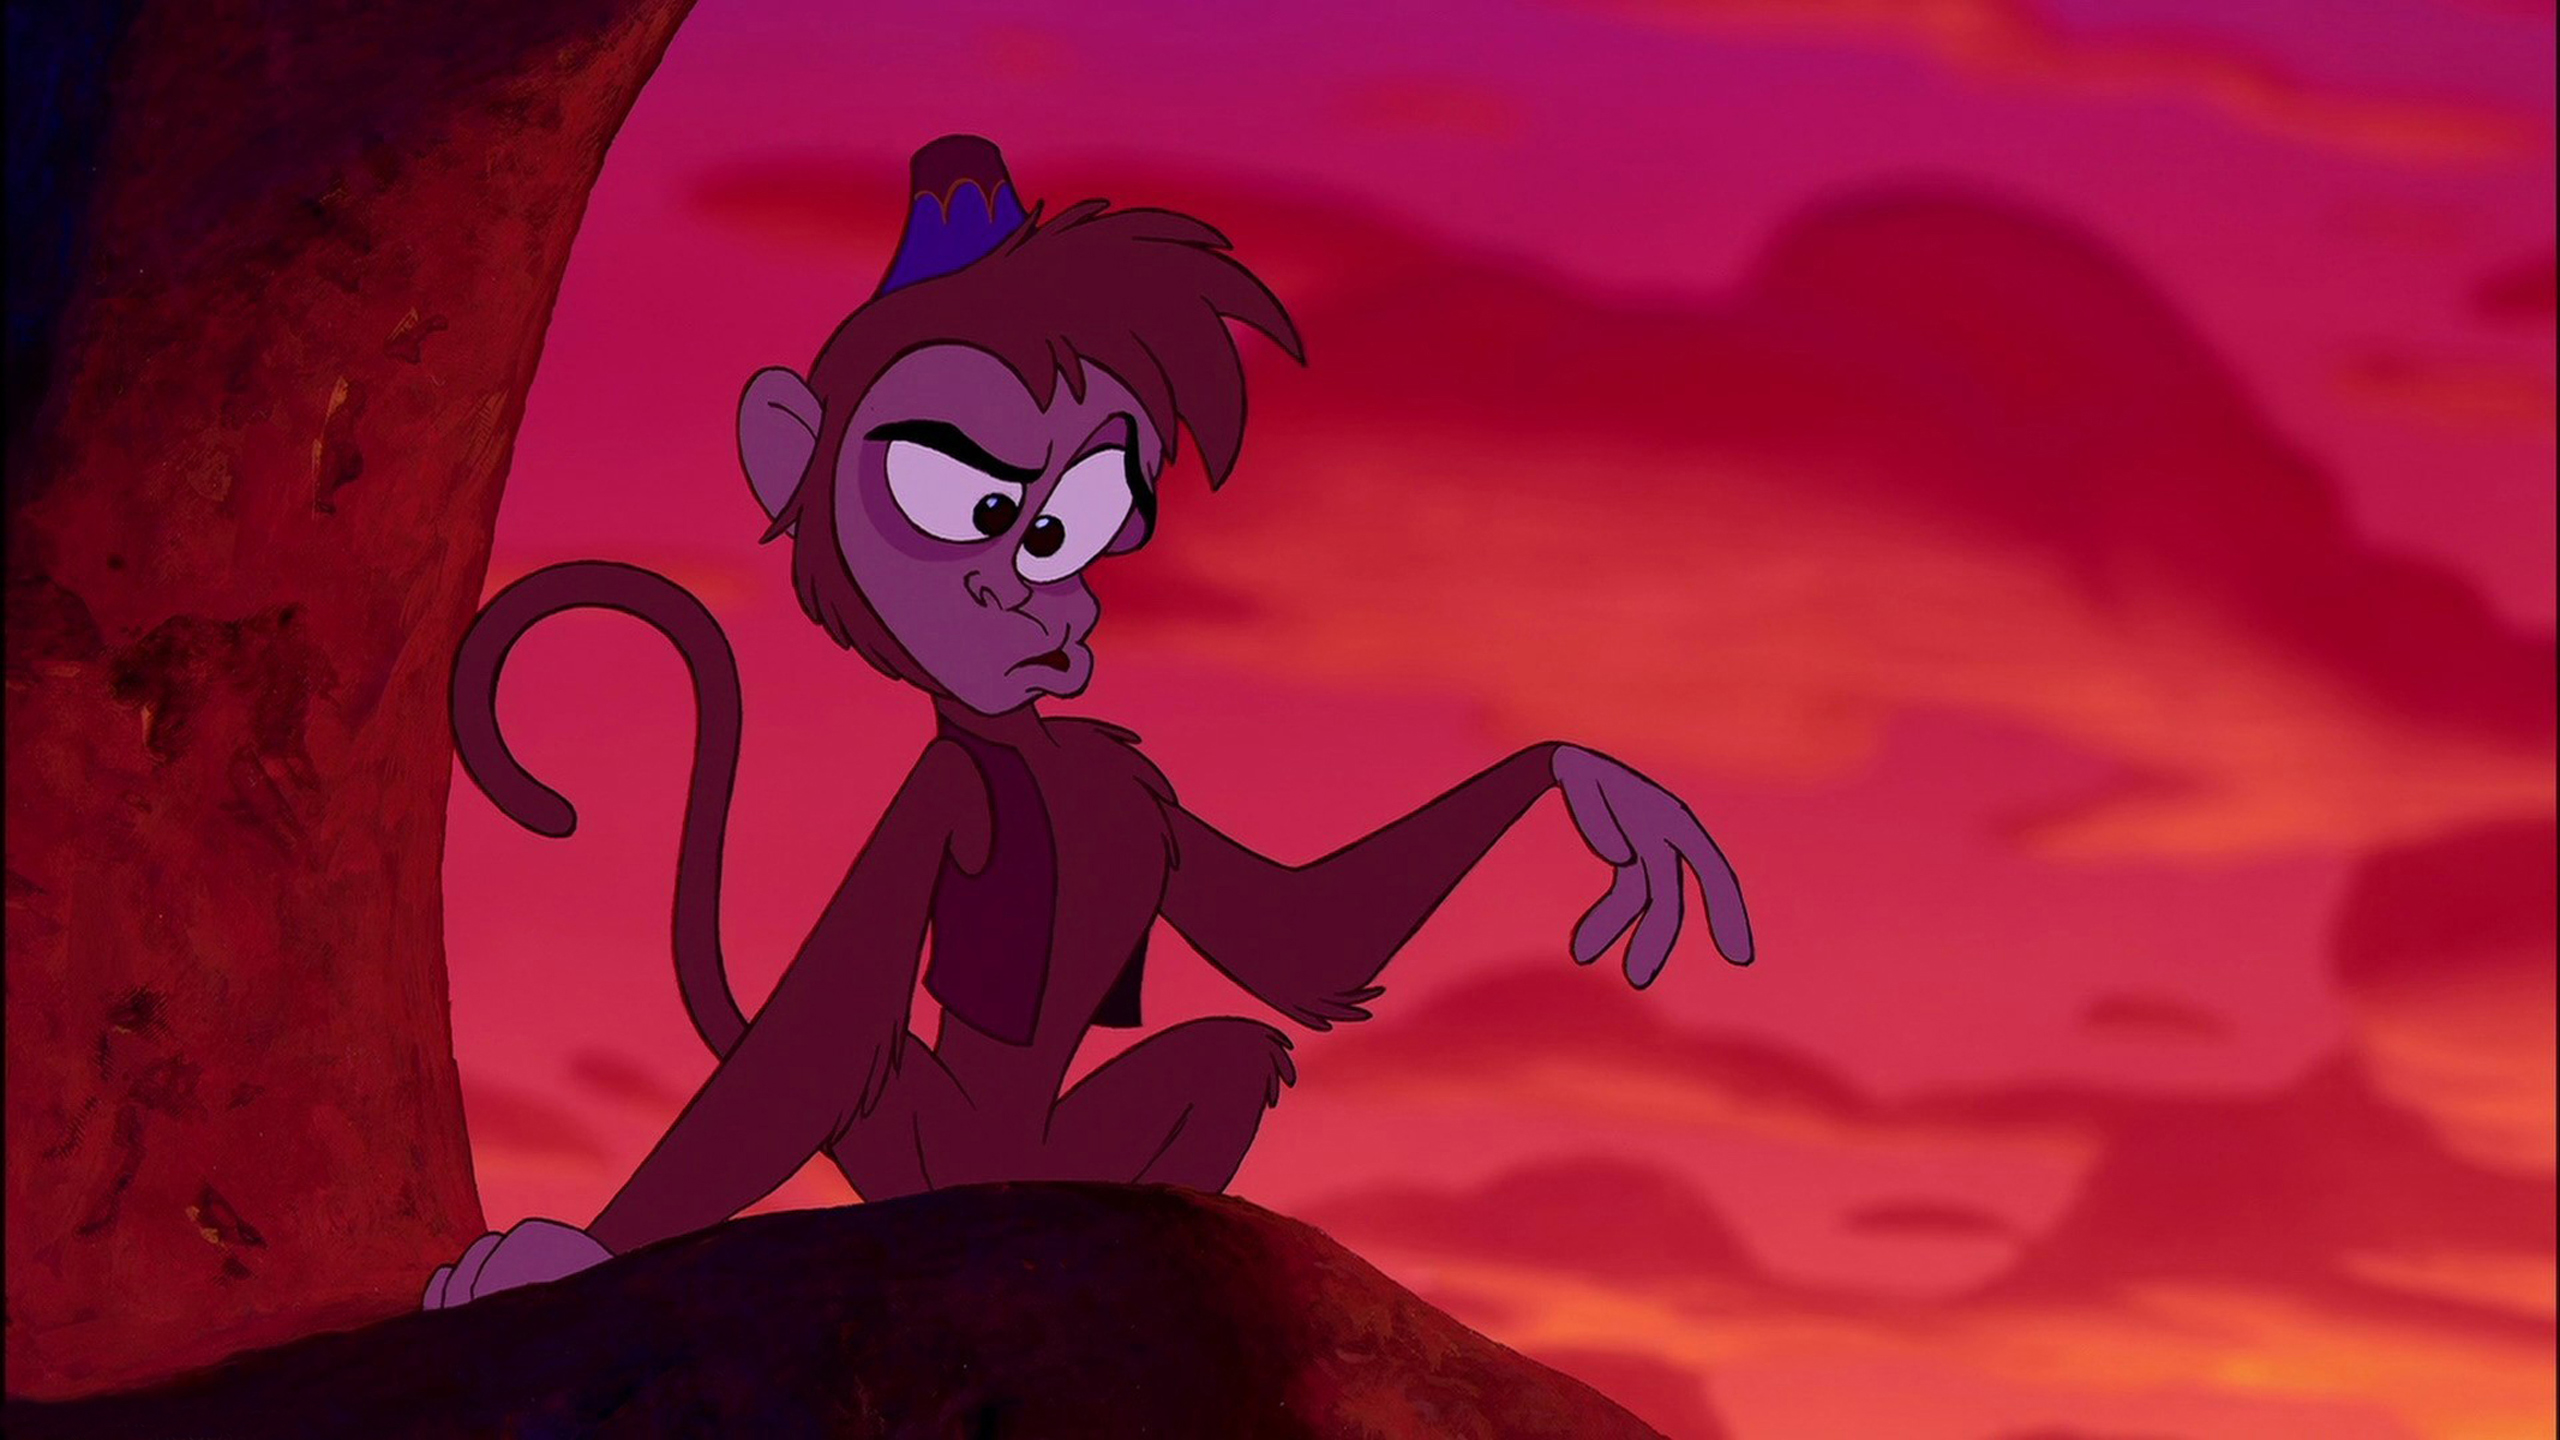 Abu Monkey Character From The Cartoon Aladdin And The Magic Lamp 2560x1440